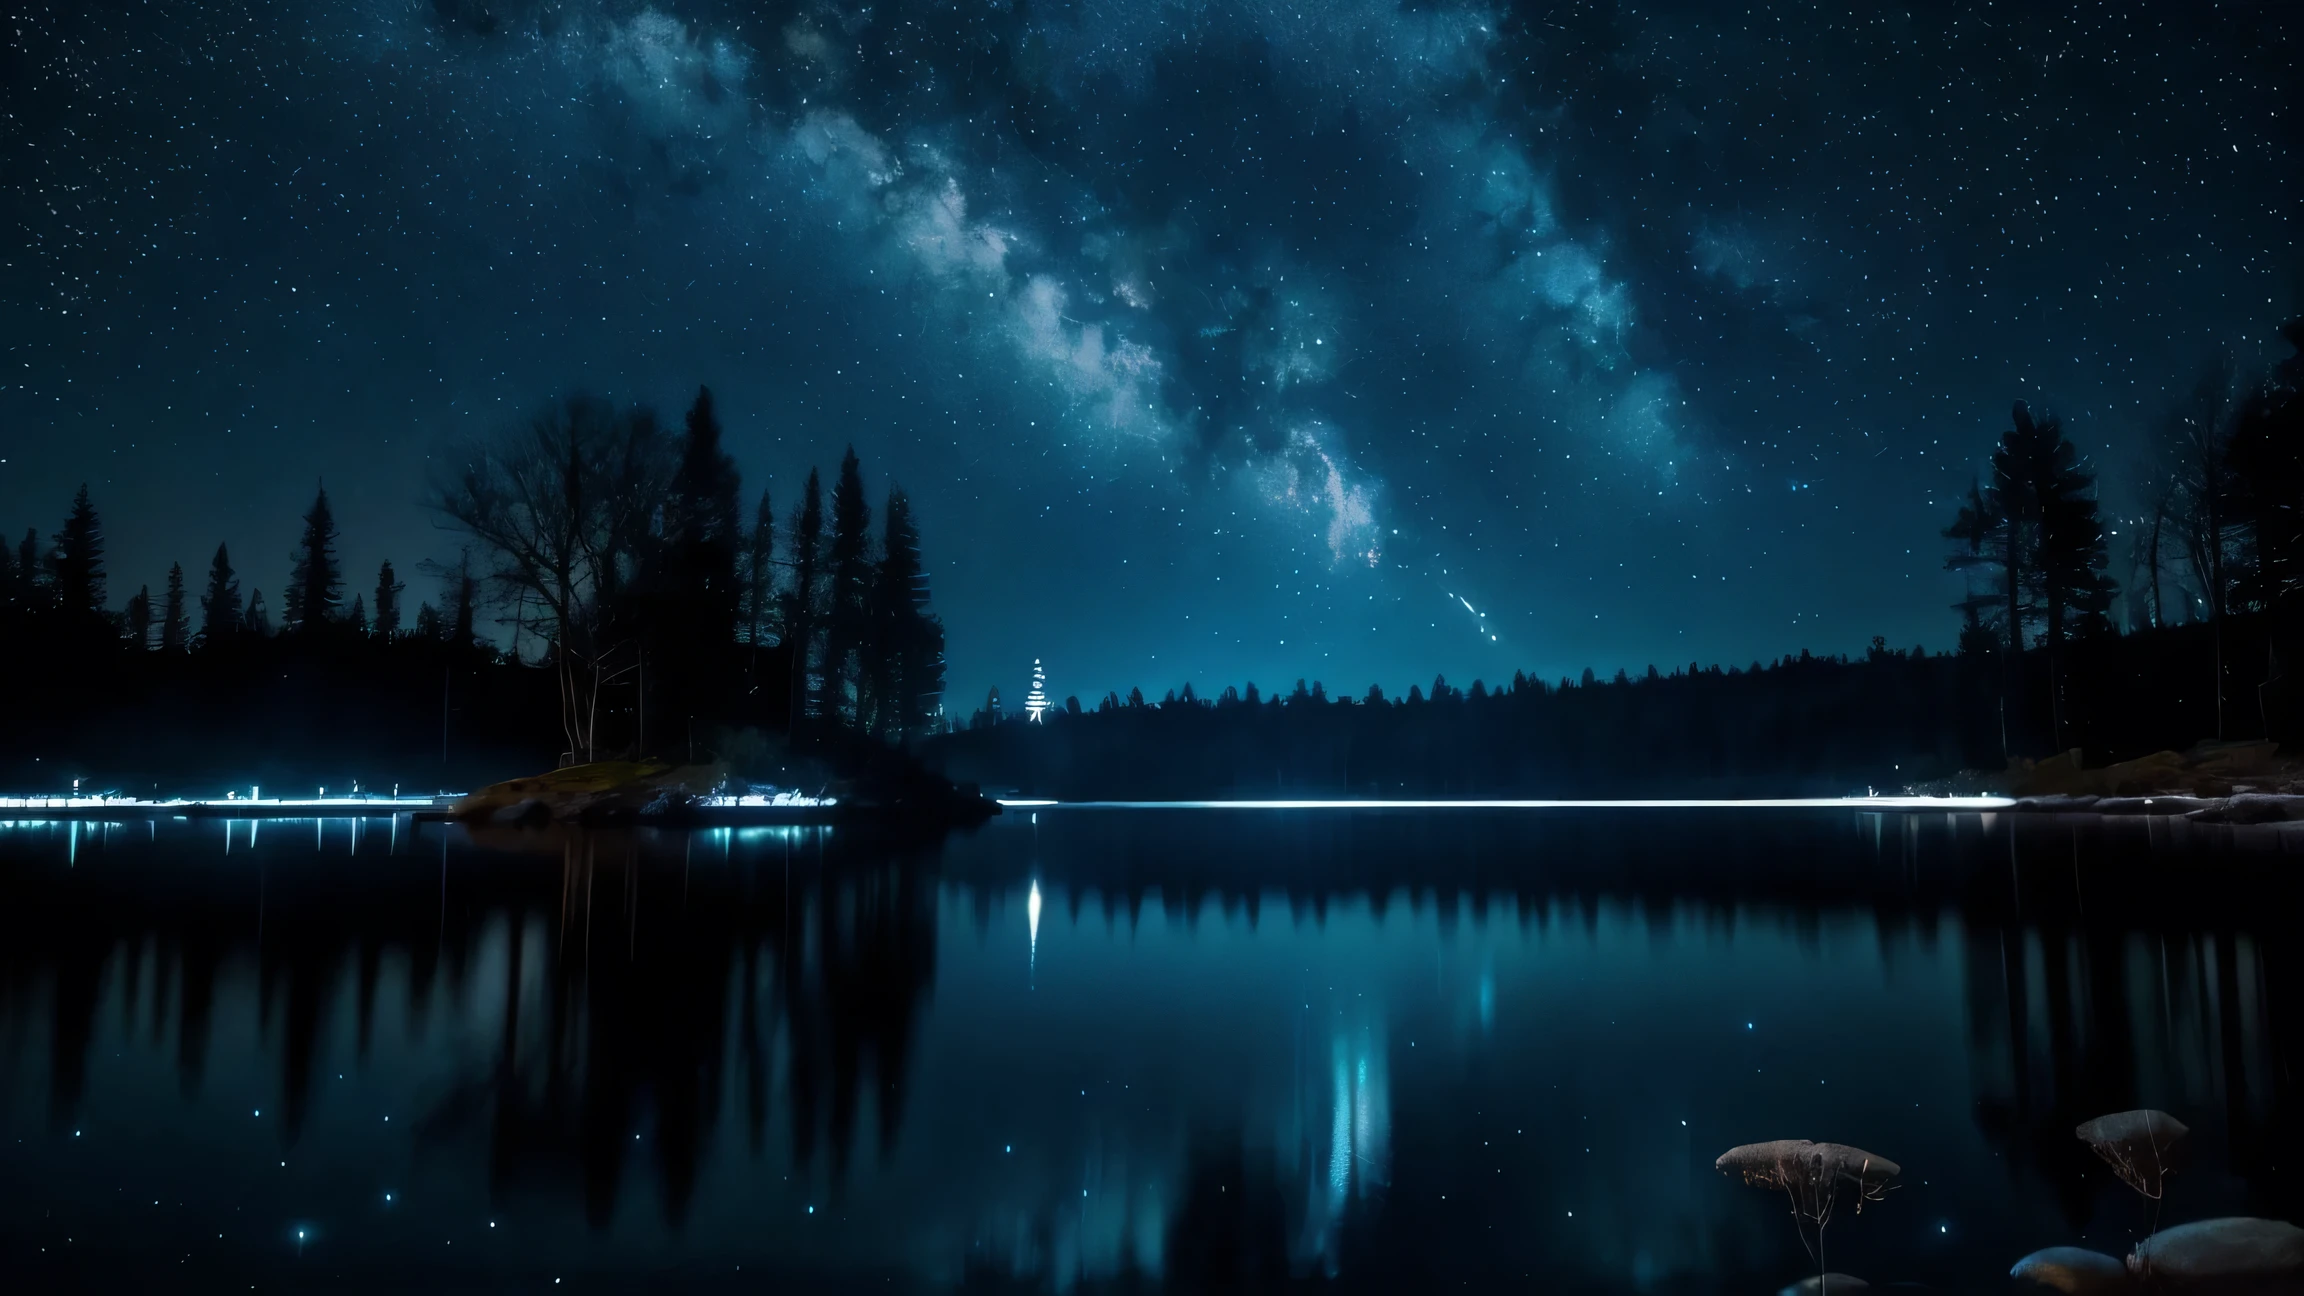 A blue glowing tree made of light in the center, shimmering with silver stars on the water surface. The background is dark and starry sky, with a blue faint glow on top of it. Add small circle lights floating around. In an animated style, the leaves sparkle like diamonds, creating a mysterious atmosphere. The scene conveys dreamy and tranquility, and harmony, giving people feelings of calmness and magical beauty. Deep focus, high contrast, wide shot, hyper realistic photography